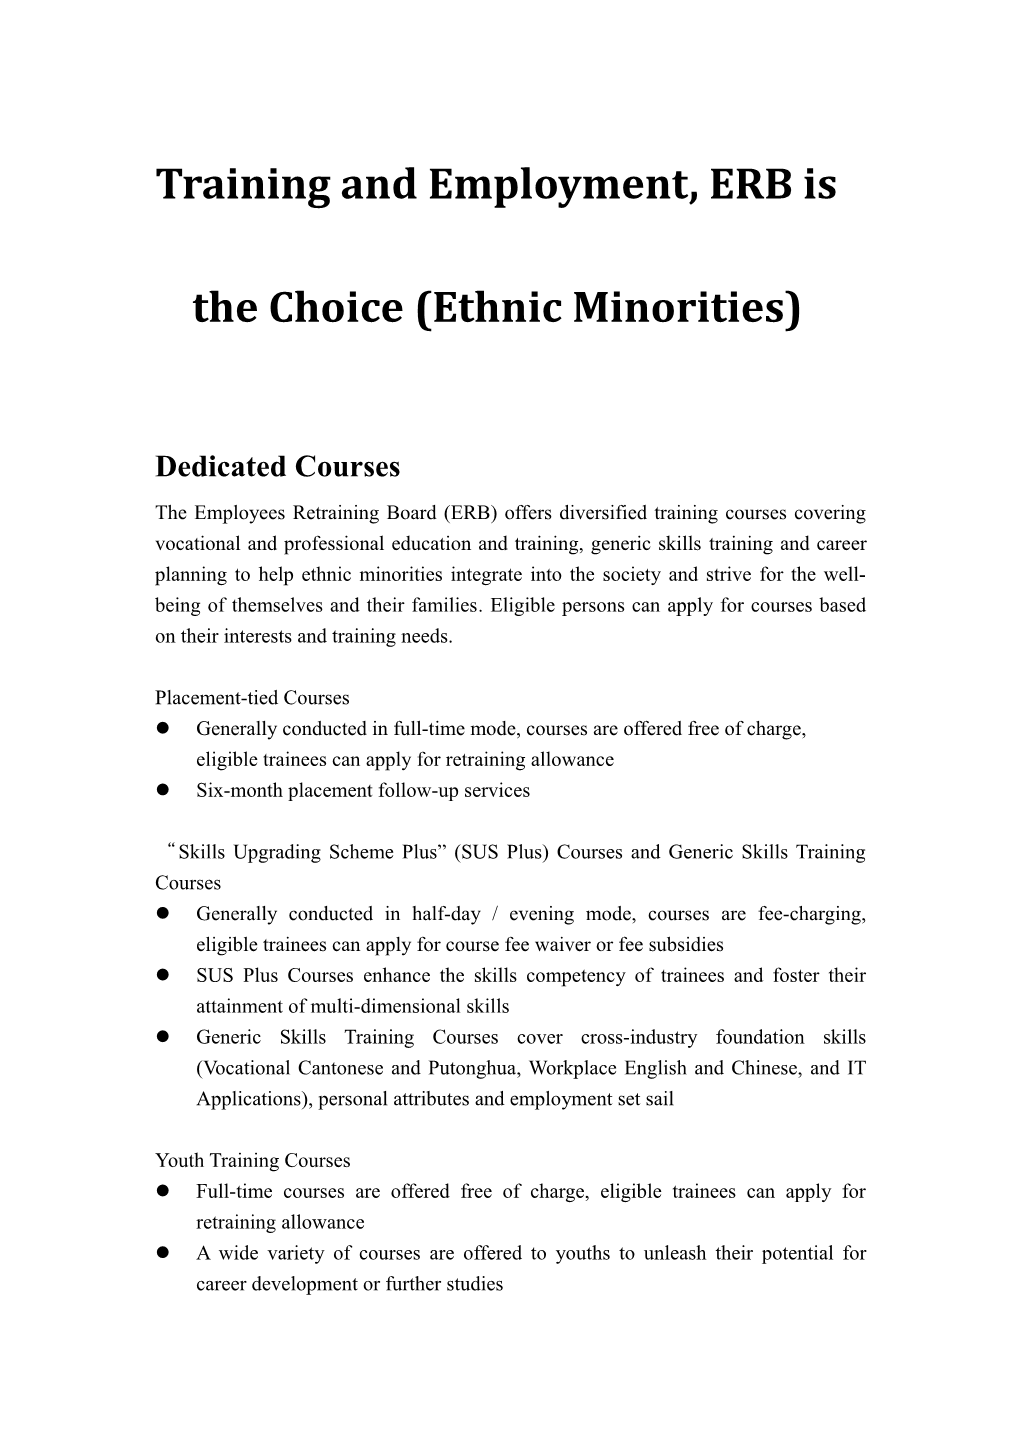 Training and Services for Ethnic Minorities (April 2017) Leaflet